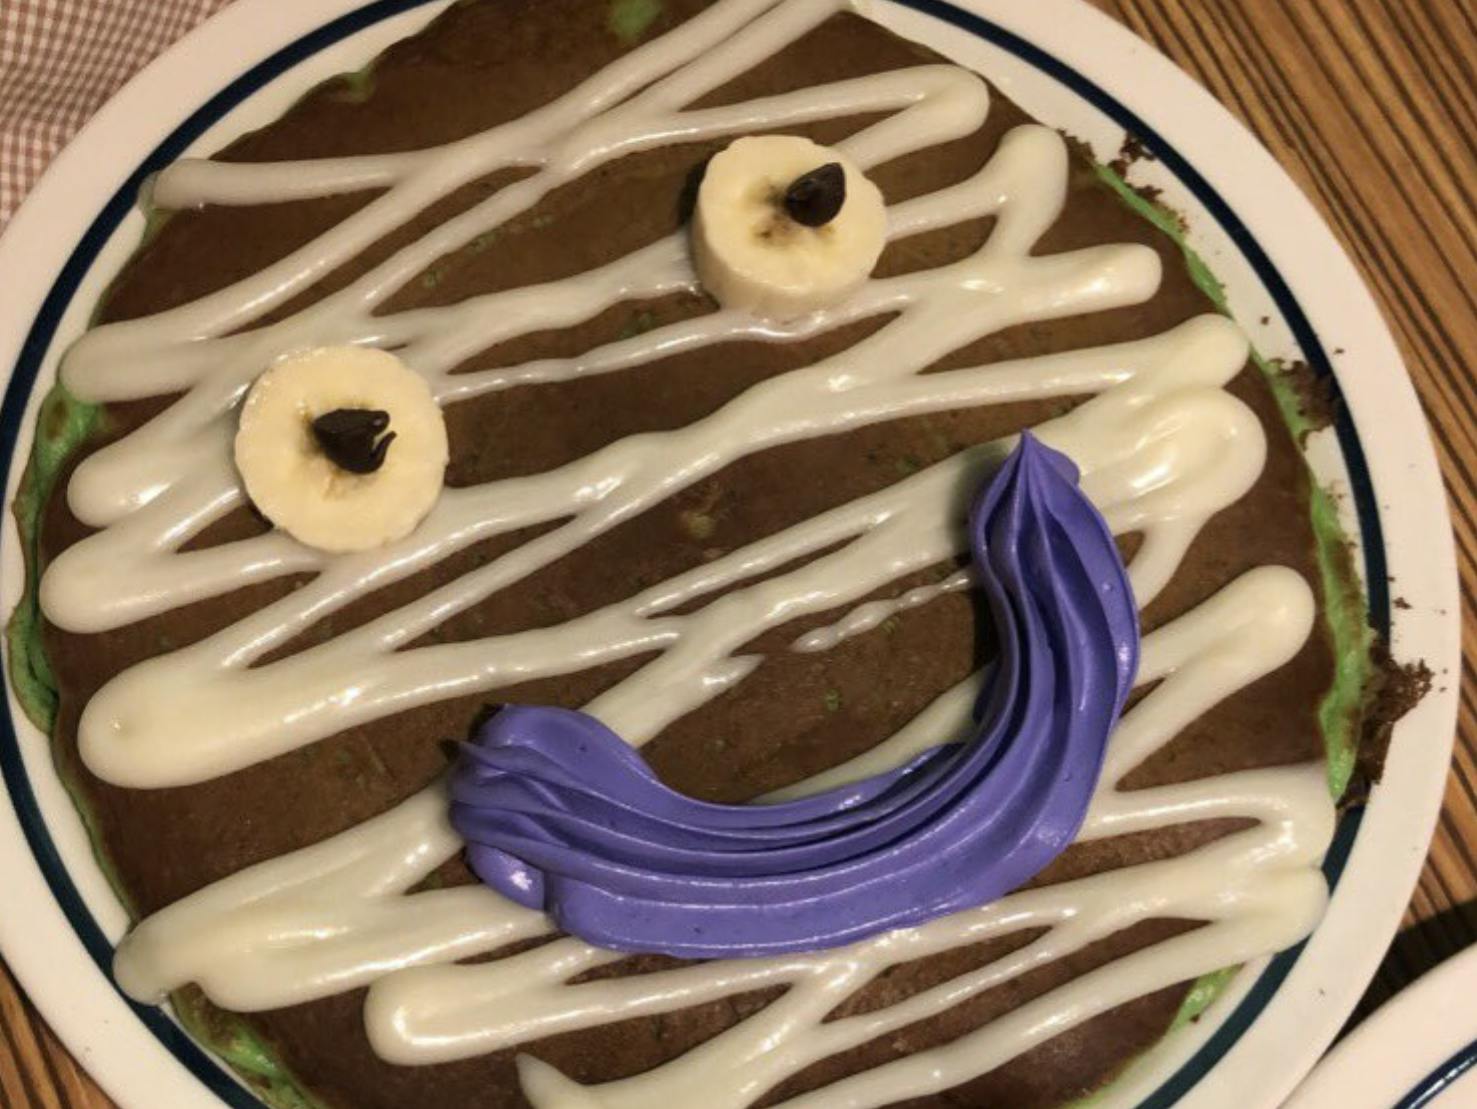 A close-up of a Mr. Mummy pancake from IHOP.